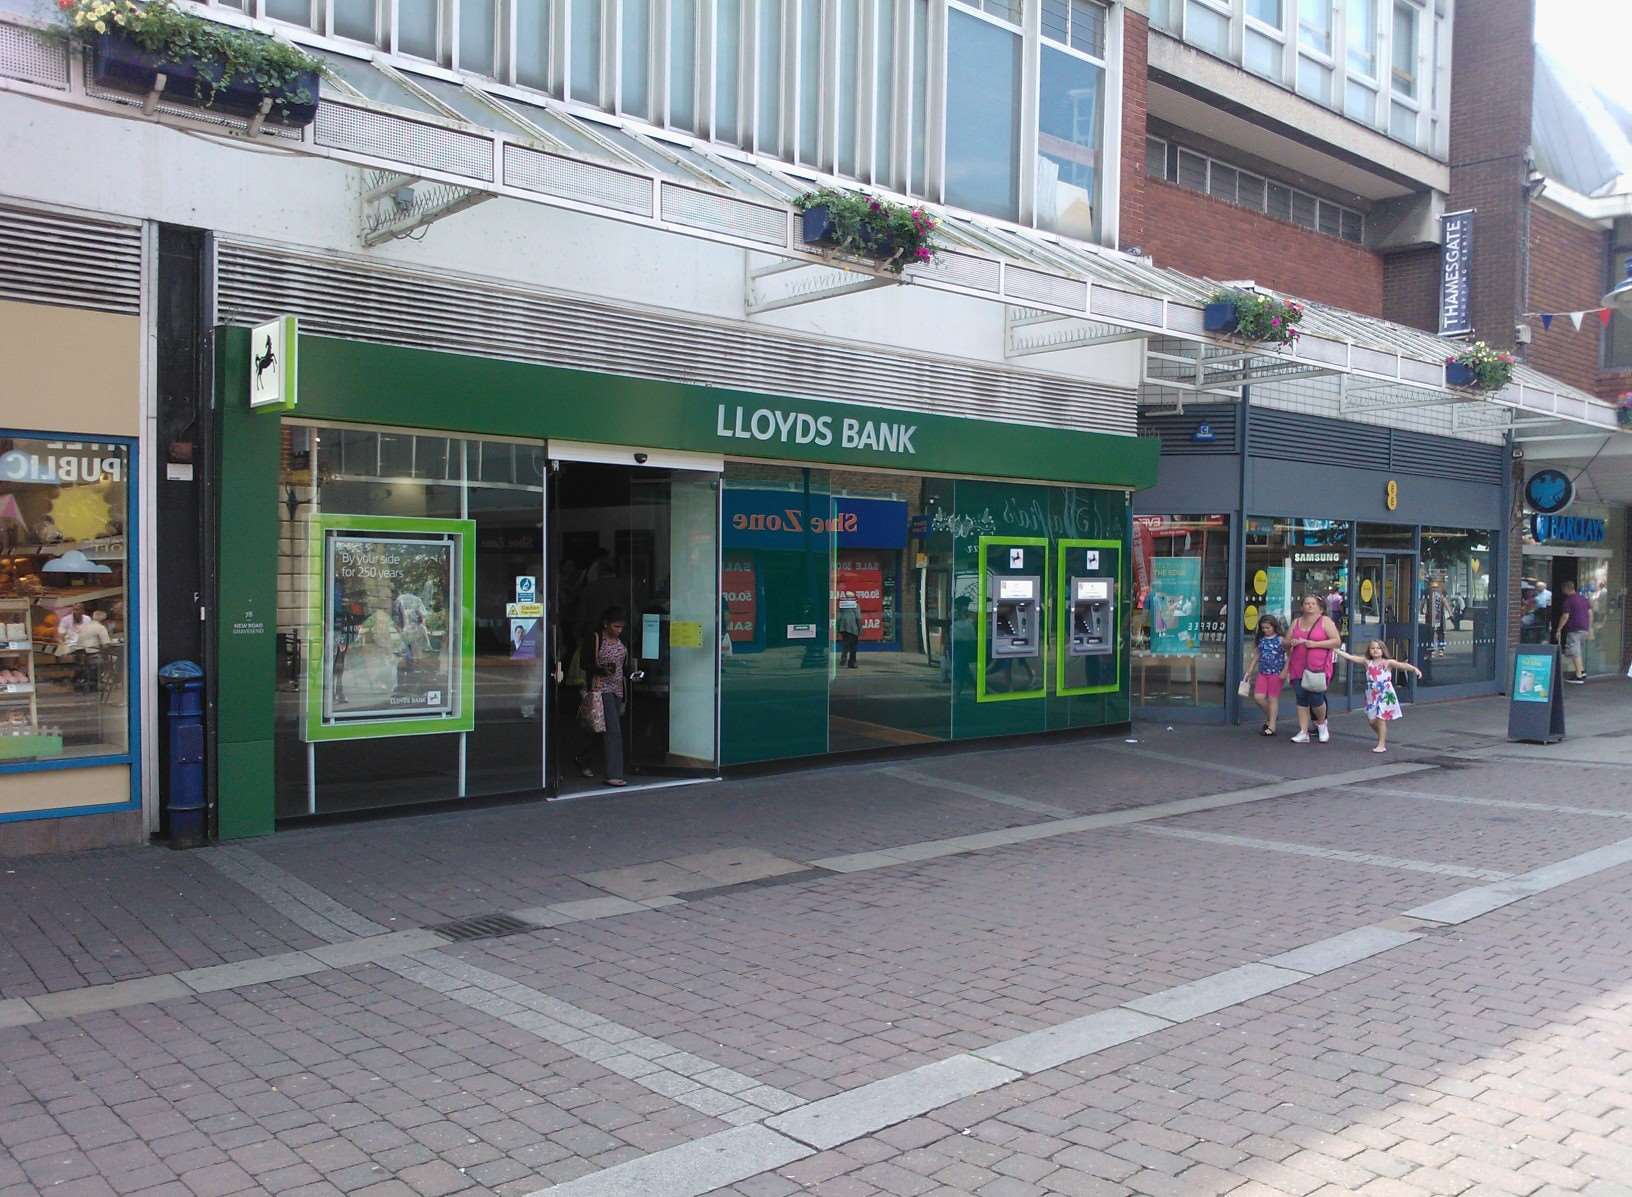 Police were called to Lloyds Bank in New Road, Gravesend when an unattended bag was spotted